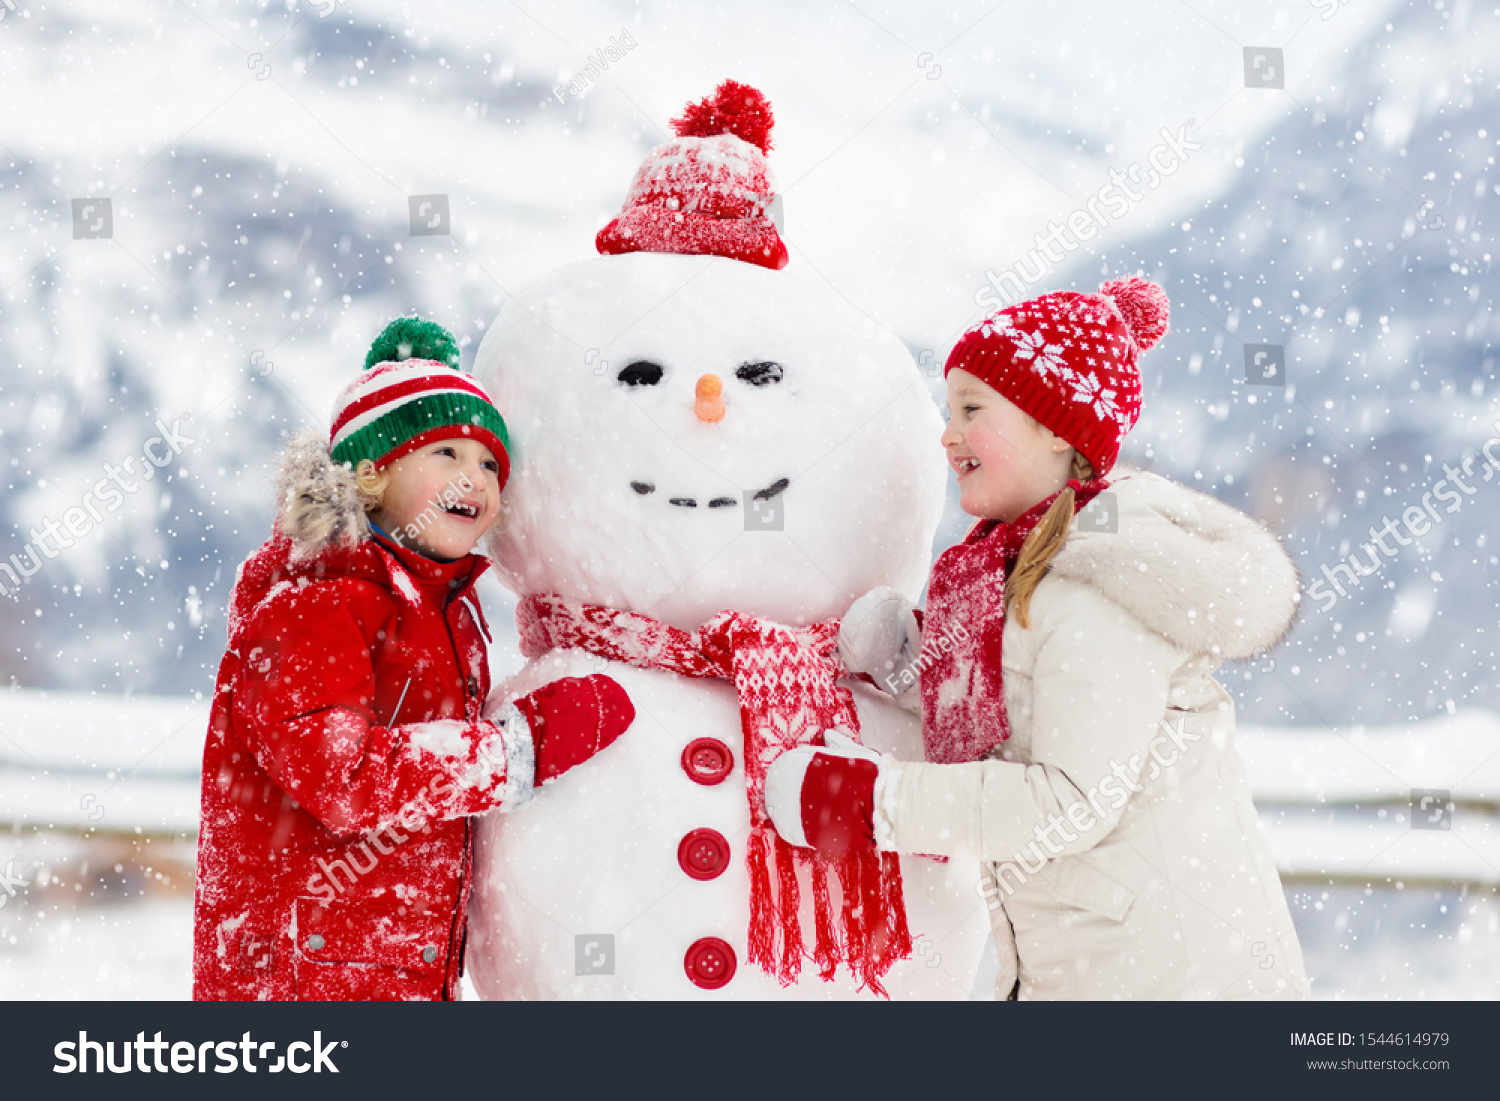 Child building snowman. Kids build snow man. Boy and girl playing outdoors on snowy winter day. Outdoor family fun on Christmas vacation in the mountains. Children play in Swiss mountain landscape. #1544614979